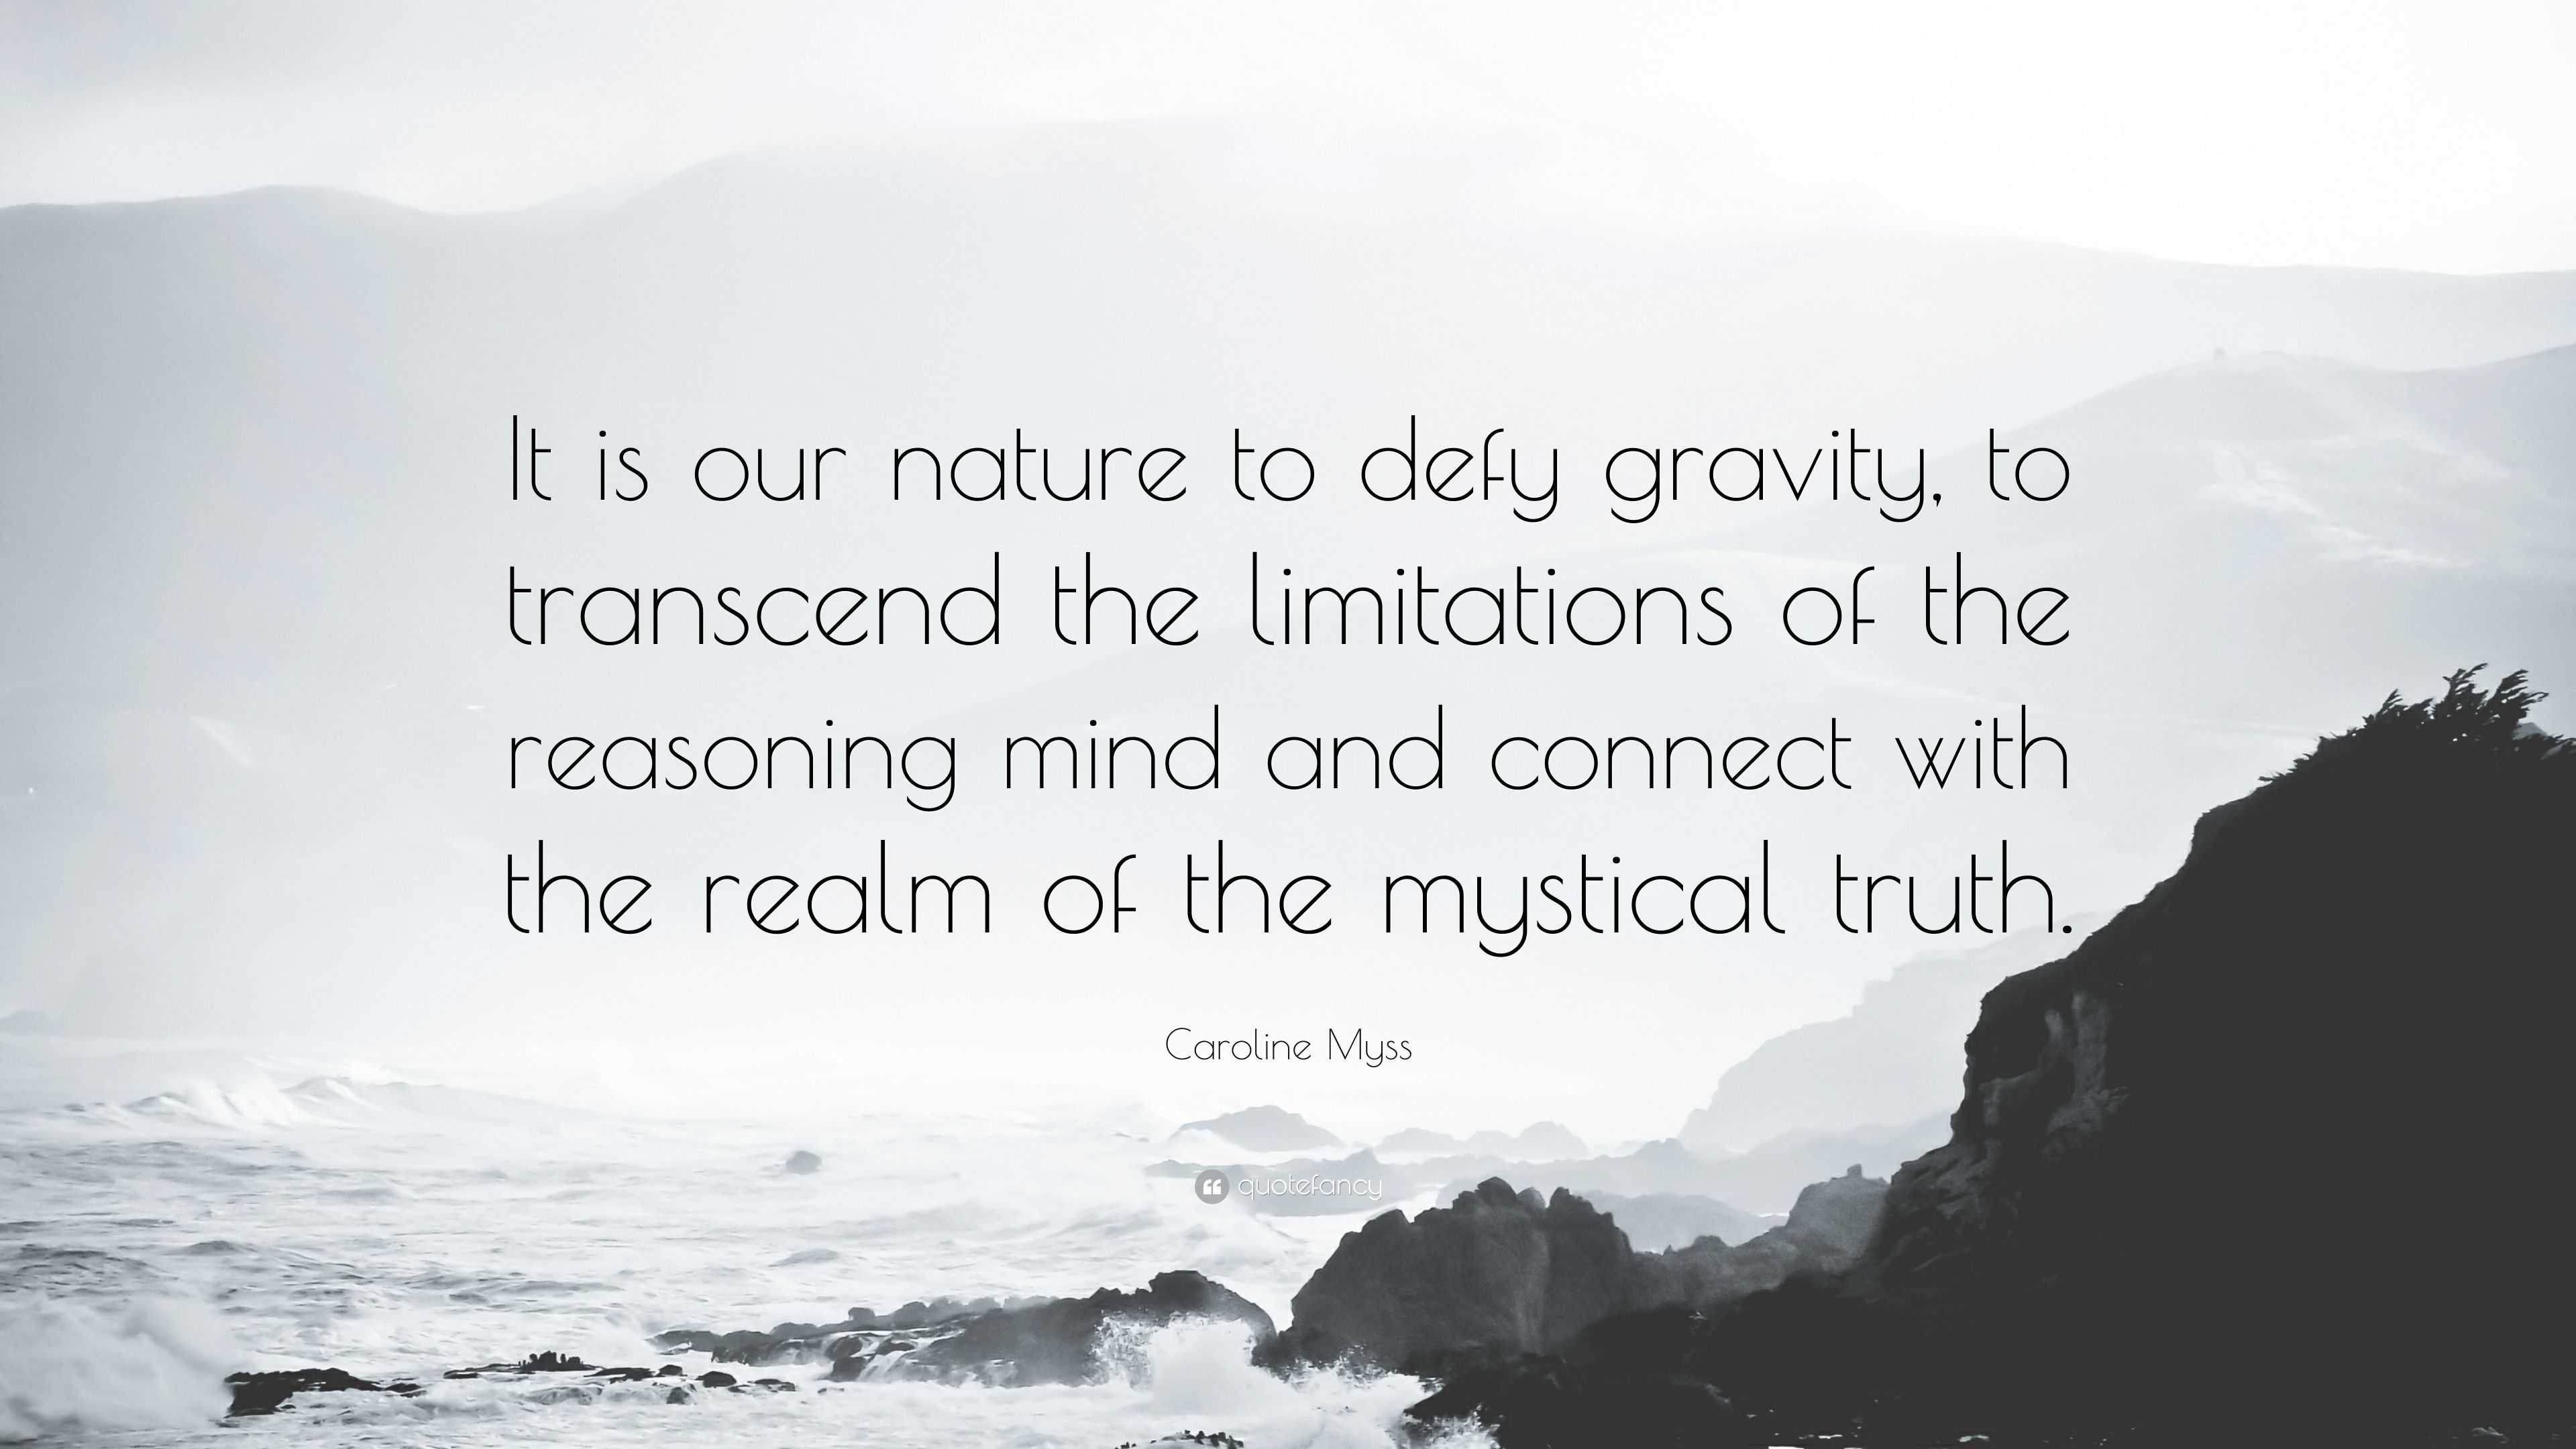 Caroline Myss Quote: “It is our nature to defy gravity, to transcend the  limitations of the reasoning mind and connect with the realm of the m”